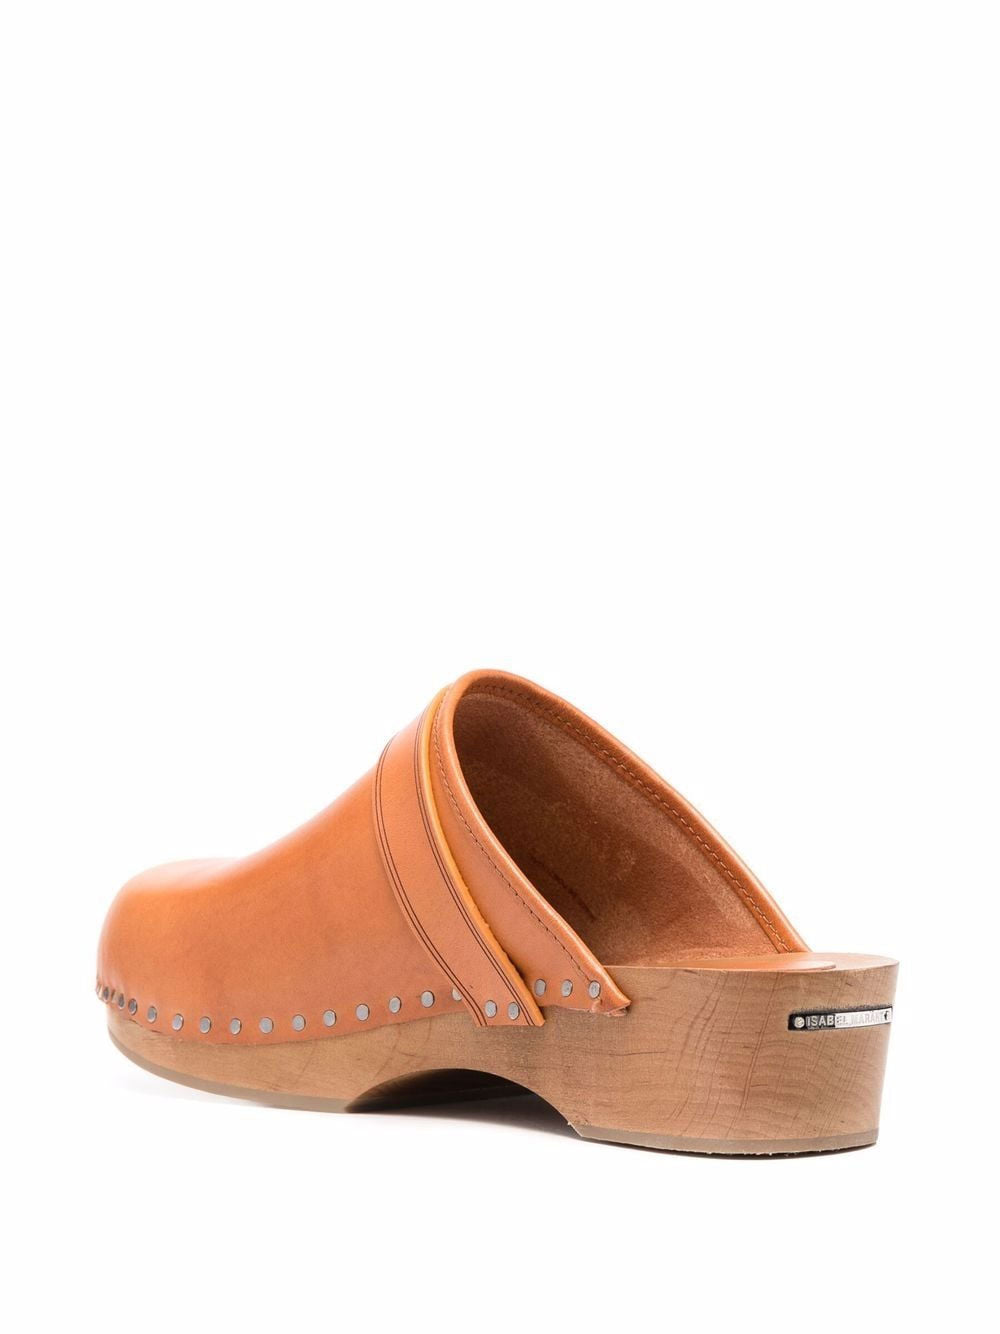 Isabel Marant brown leather clogs